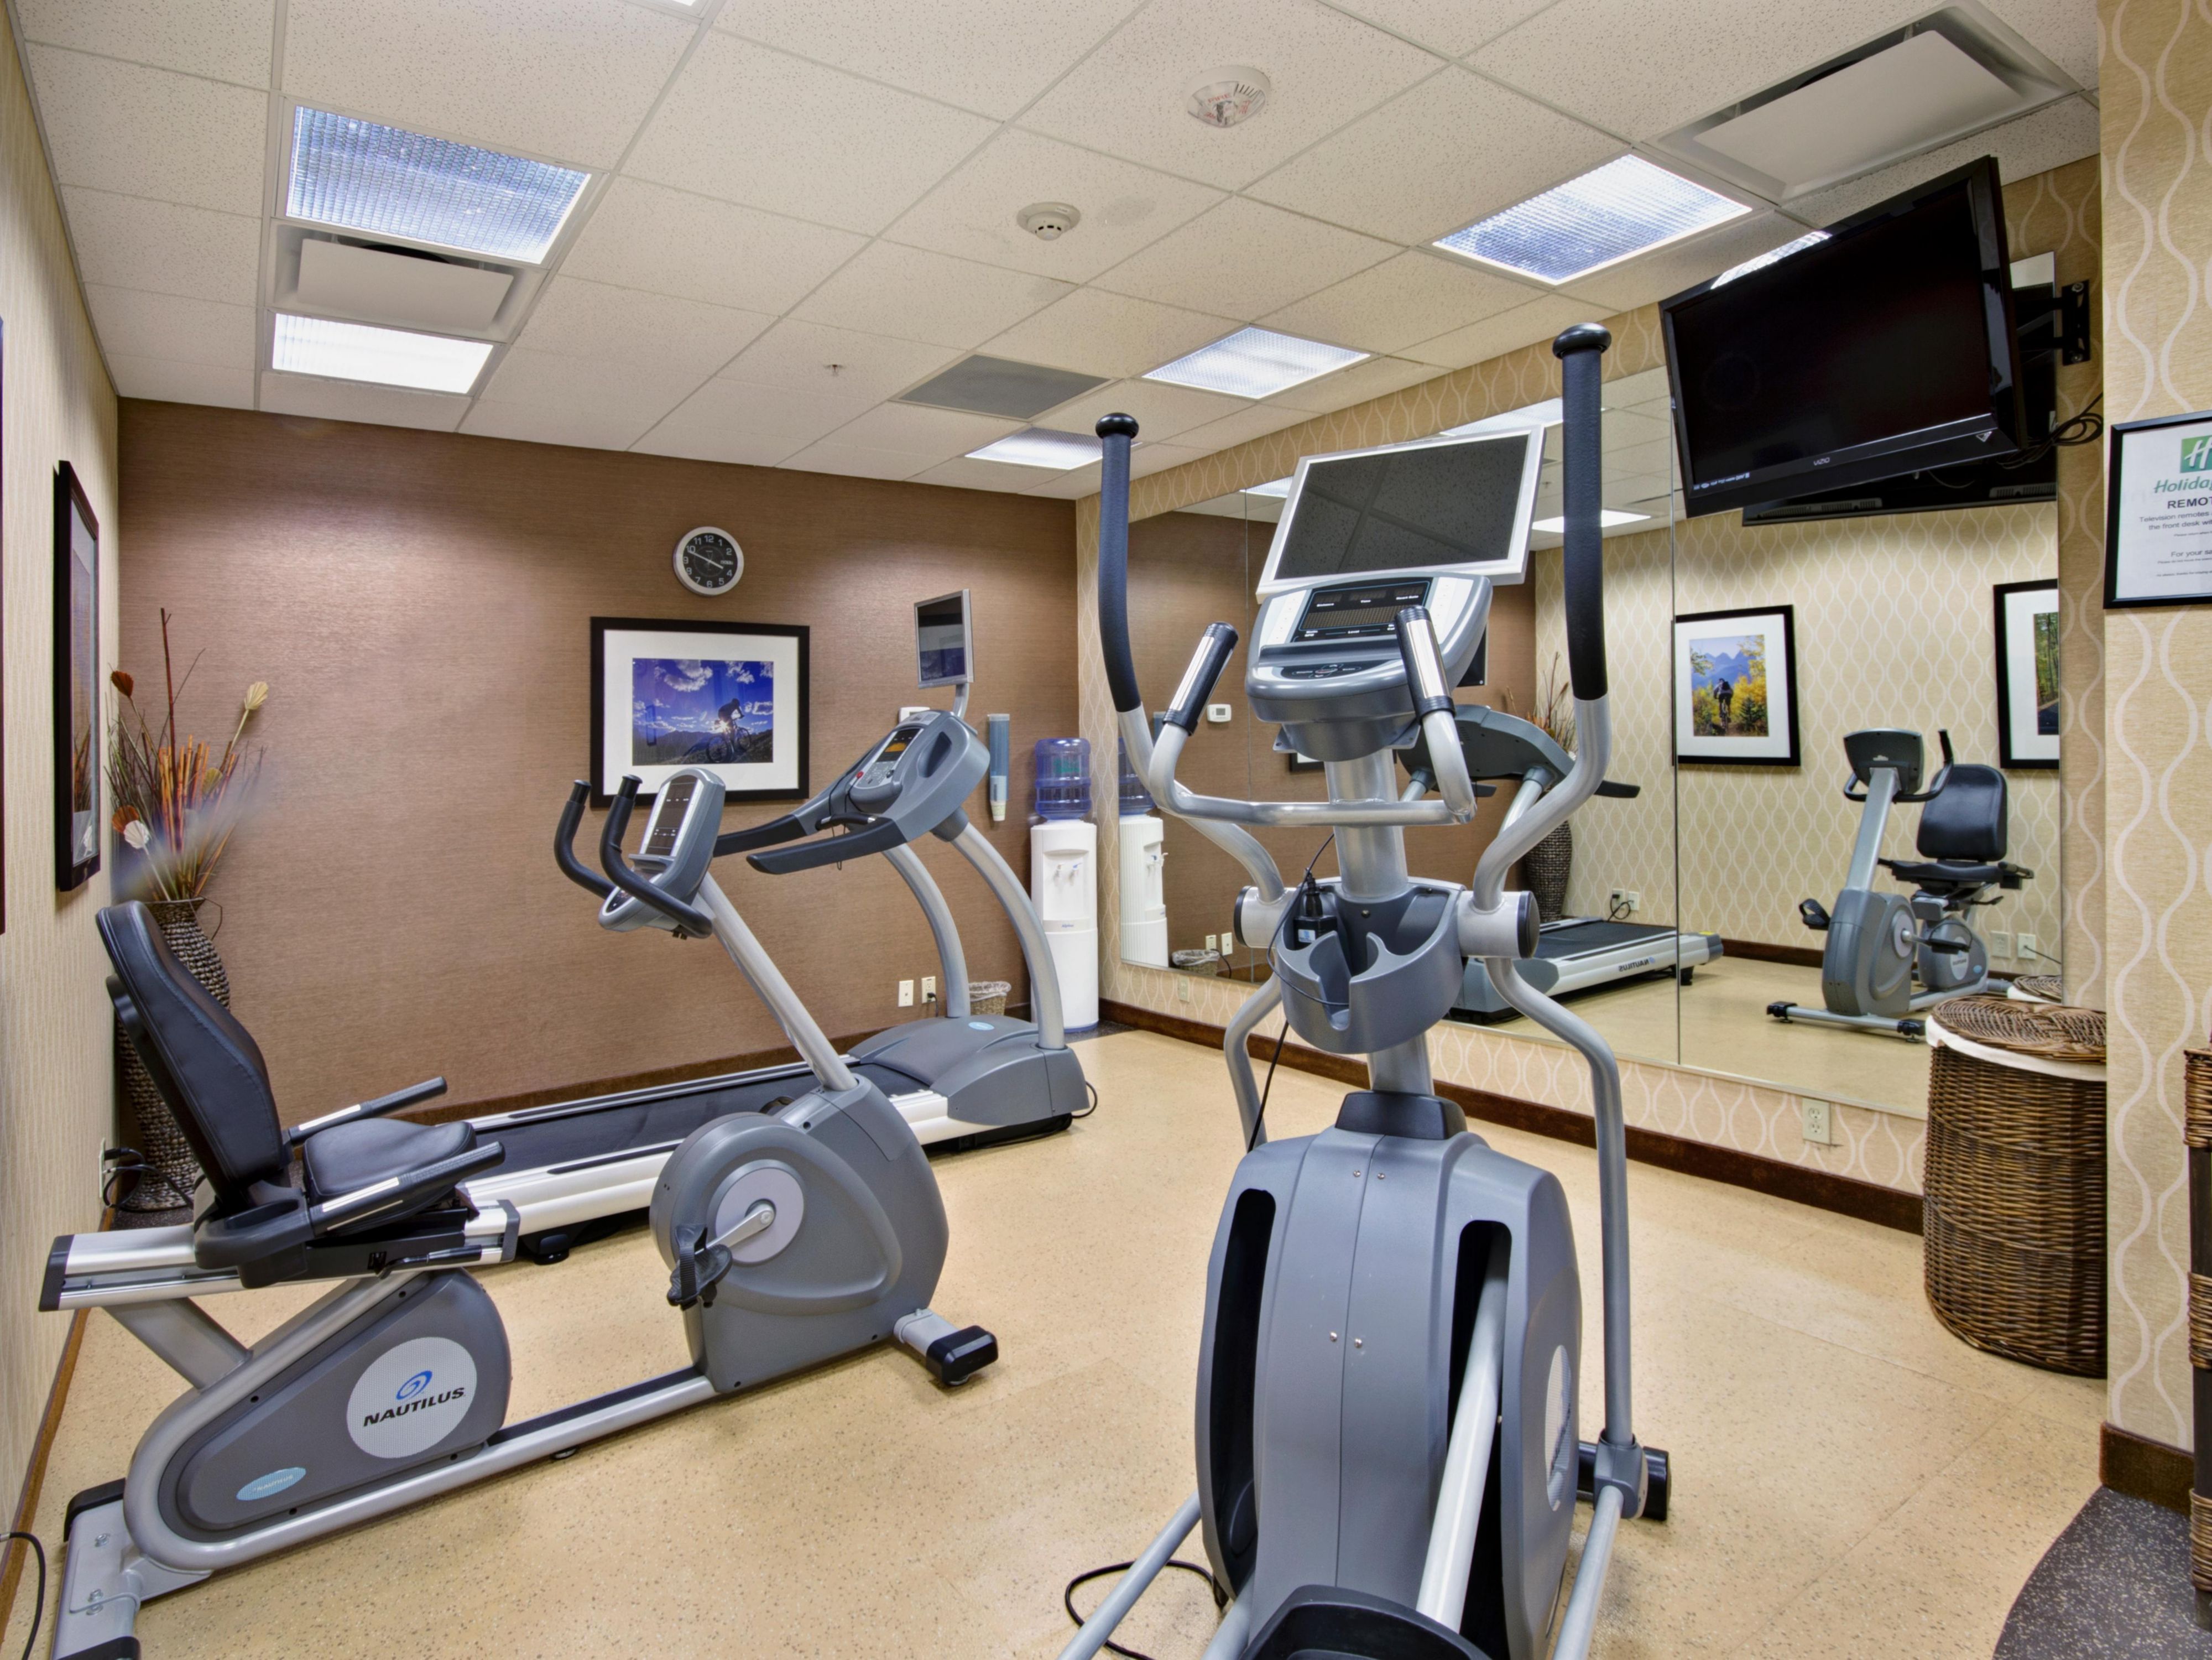 Our fitness room offers a high level of cardiovascular endurance while you are "on the road"; an Elliptical, Treadmill and a Recumbent Bike is available.